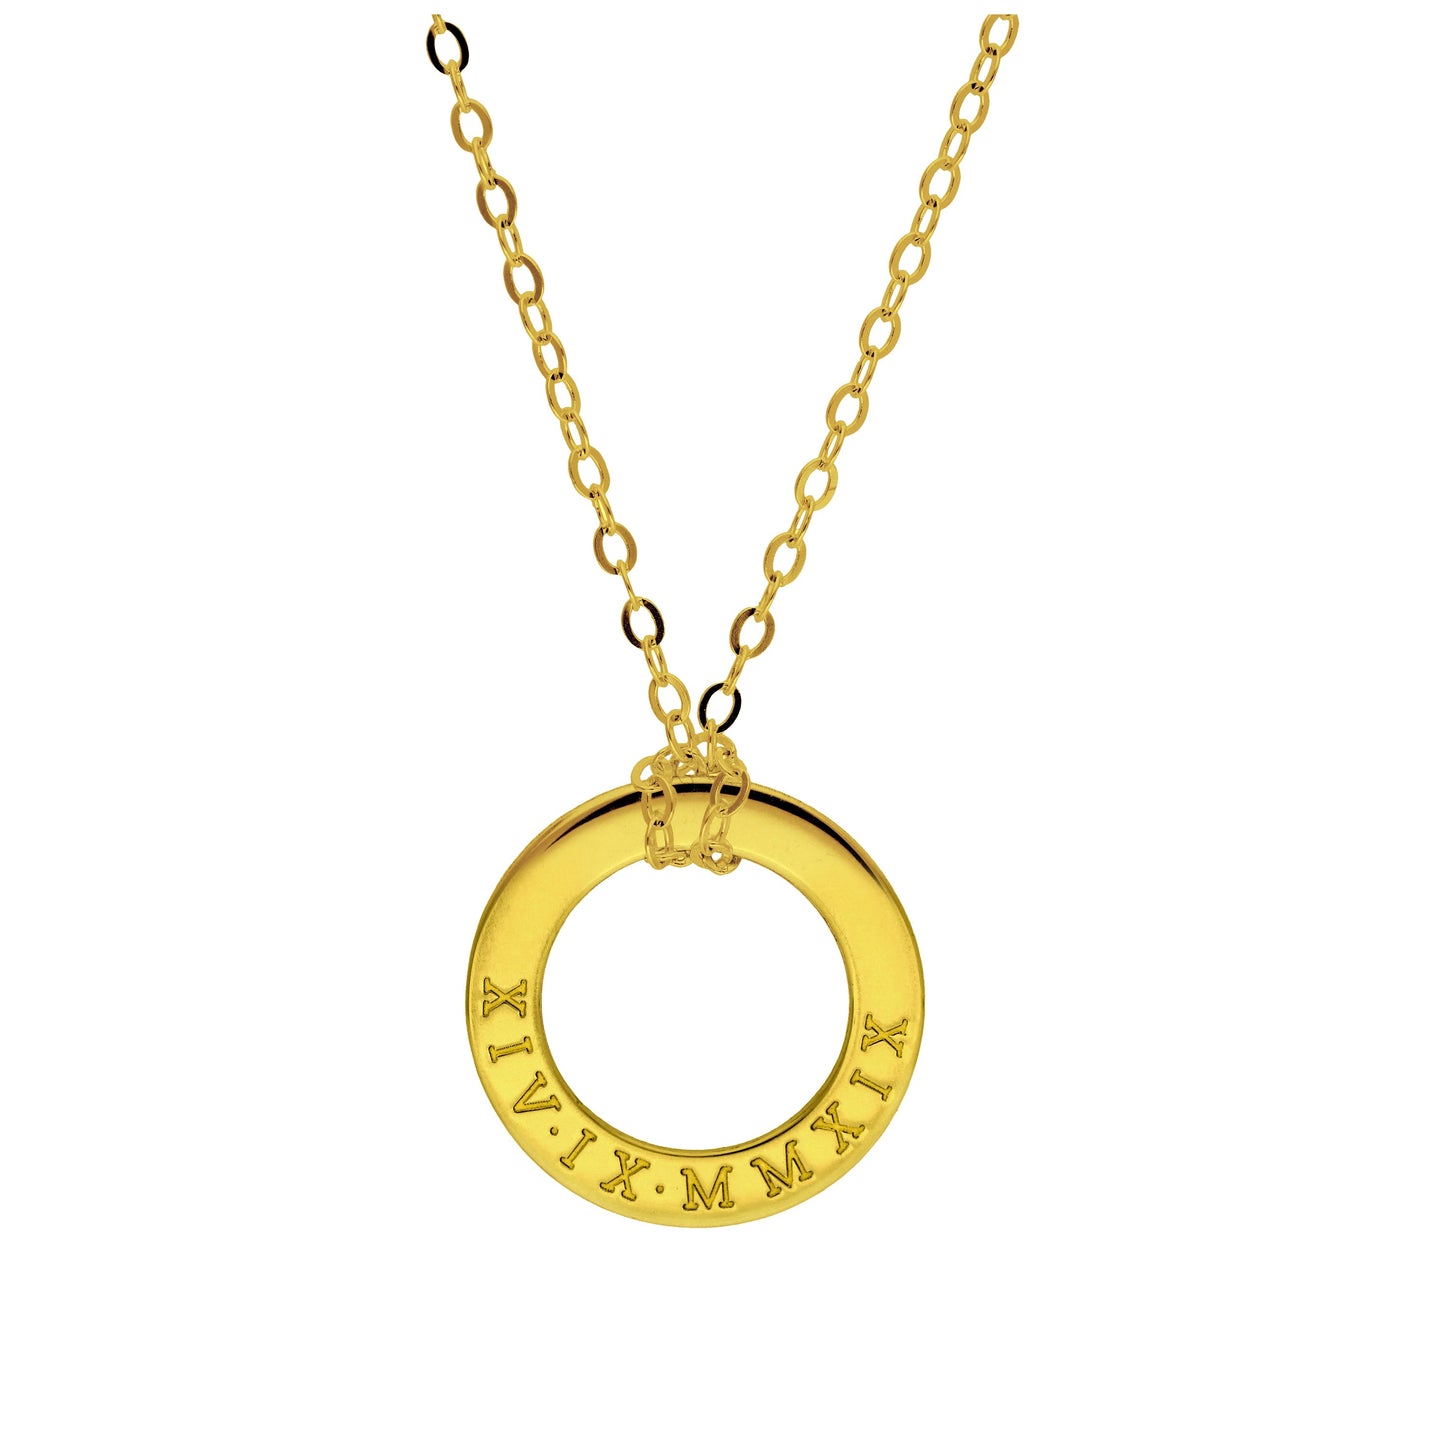 Bespoke Gold Plated Sterling Silver Roman Numeral Circle Necklace 16 - 28 Inches